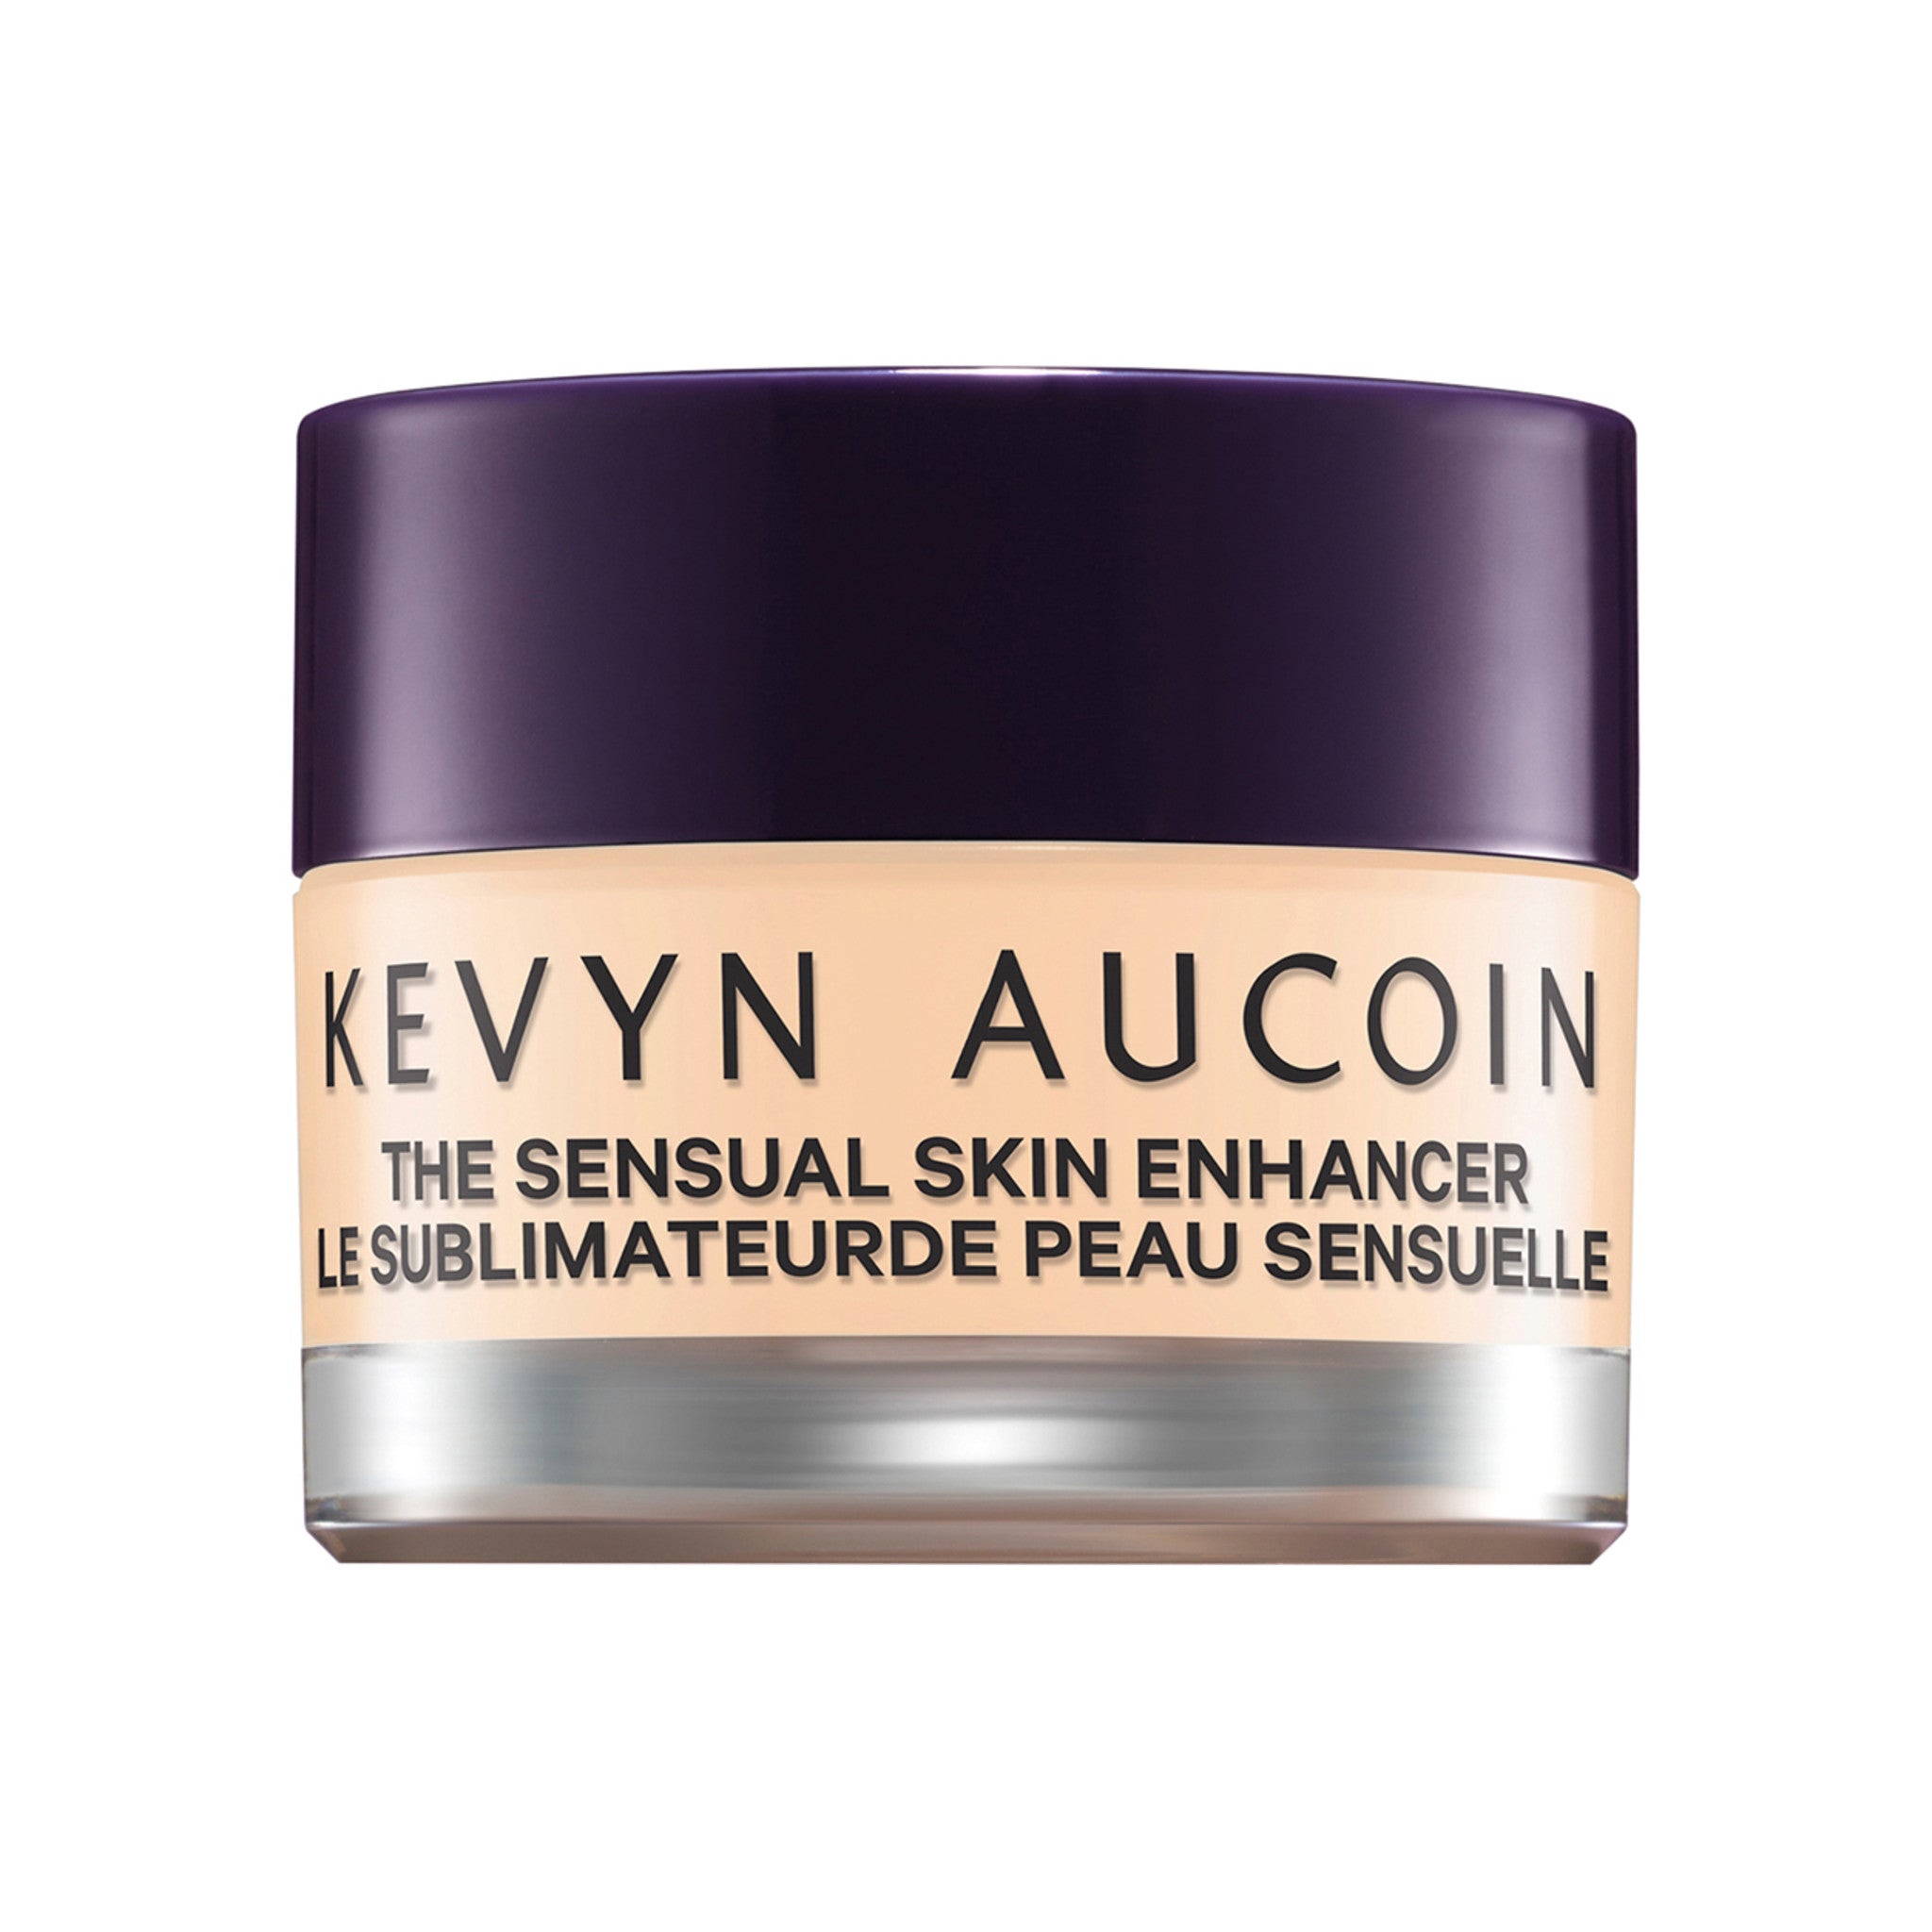 Kevyn Aucoin Sensual Skin Enhancer Color/Shade variant: 2 main image. This product is for light cool pink complexions